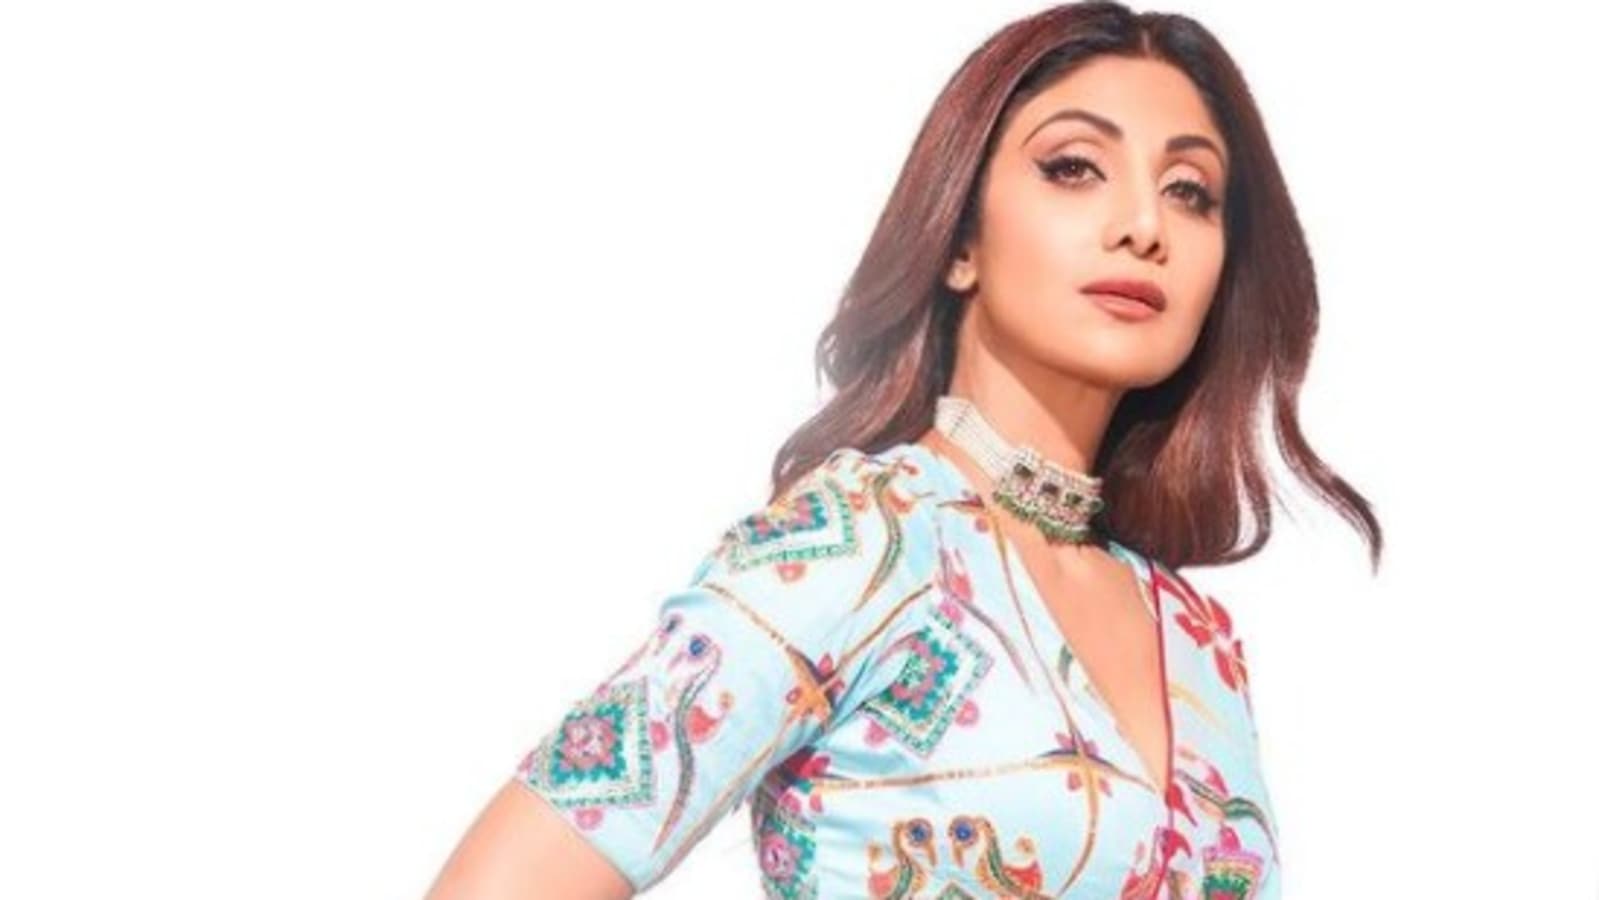 Shilpa Shetty Ki Nangi - Shilpa Shetty shares pics from first photoshoot after Raj Kundra's arrest,  is 'determined to rise'. See here | Bollywood - Hindustan Times